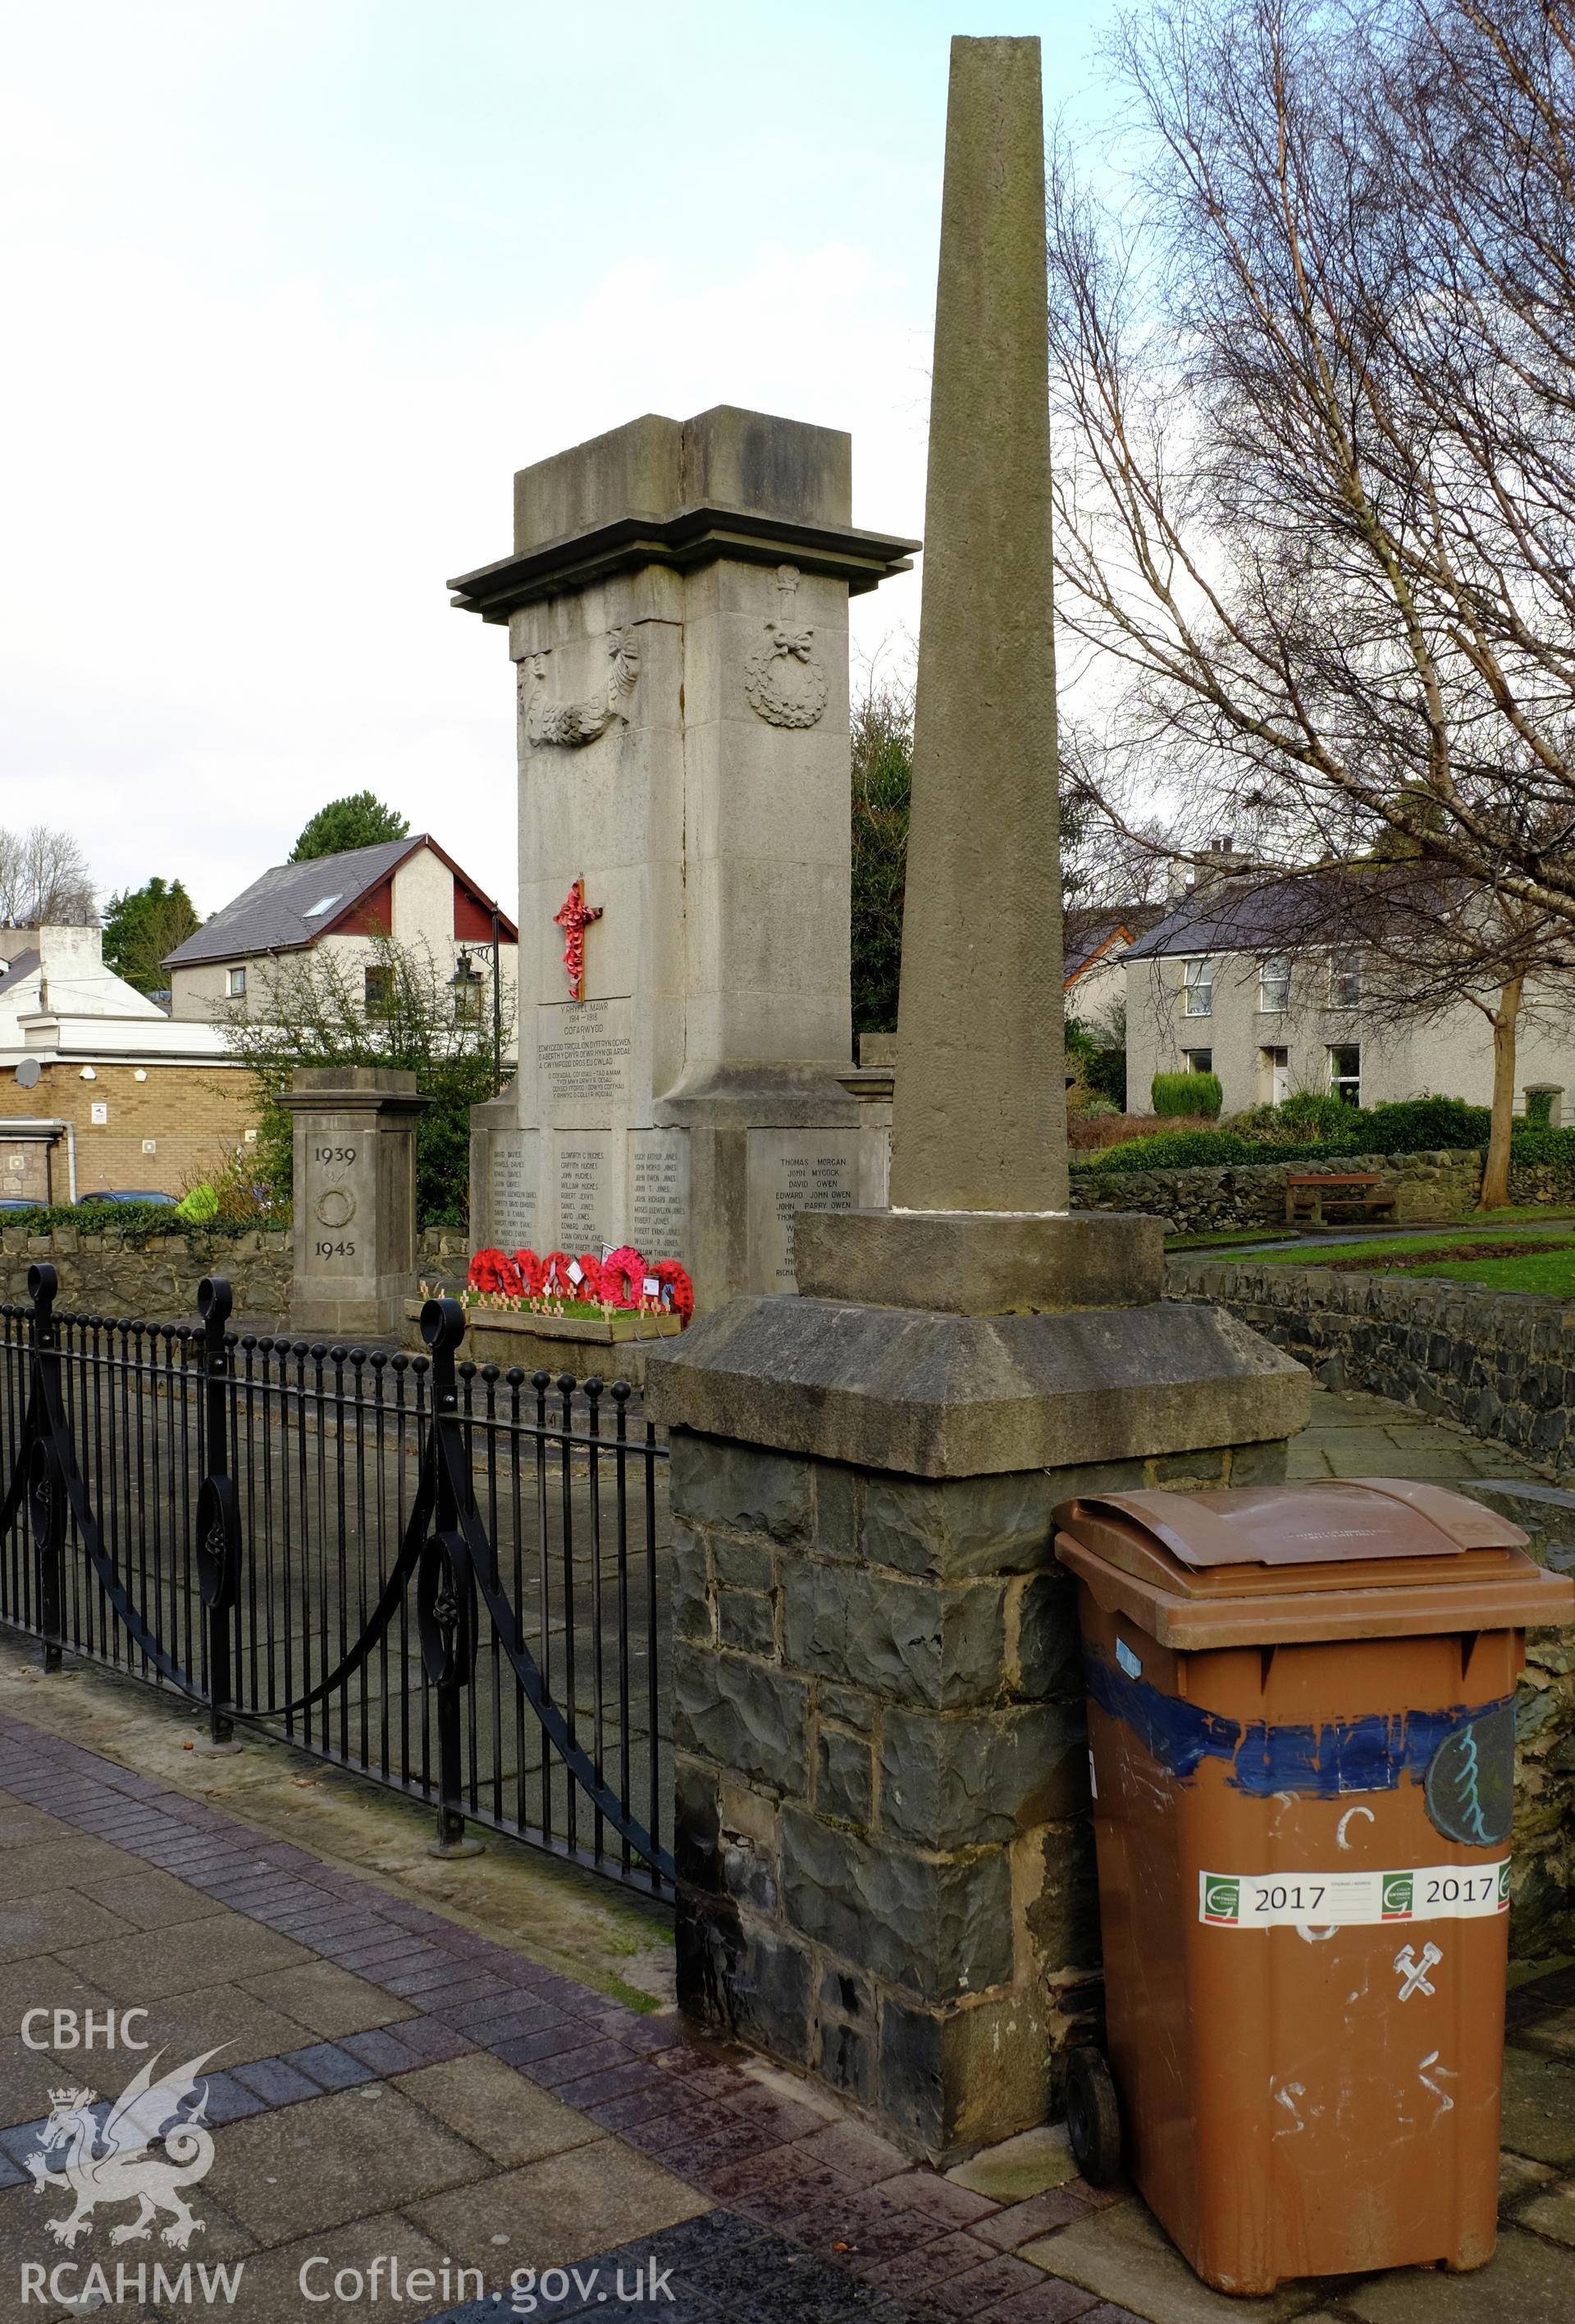 Colour photograph showing a view of Bethesda War Memorial's pier, obelisk and forecourt railings, produced by Richard Hayman 16th February 2017